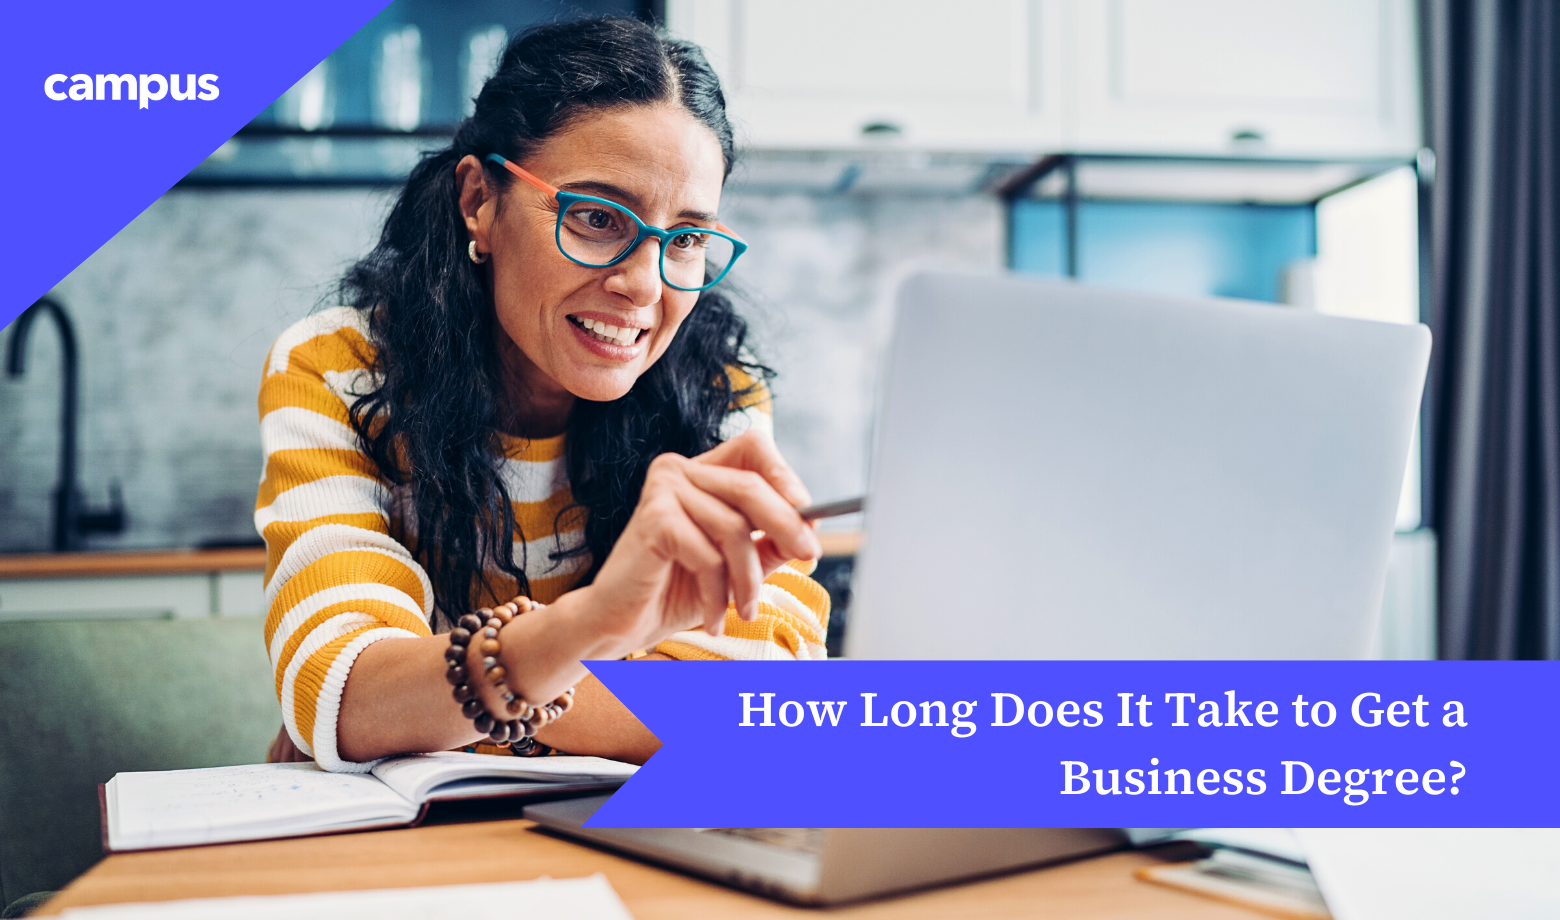 How Long Does It Take to Get a Business Degree?